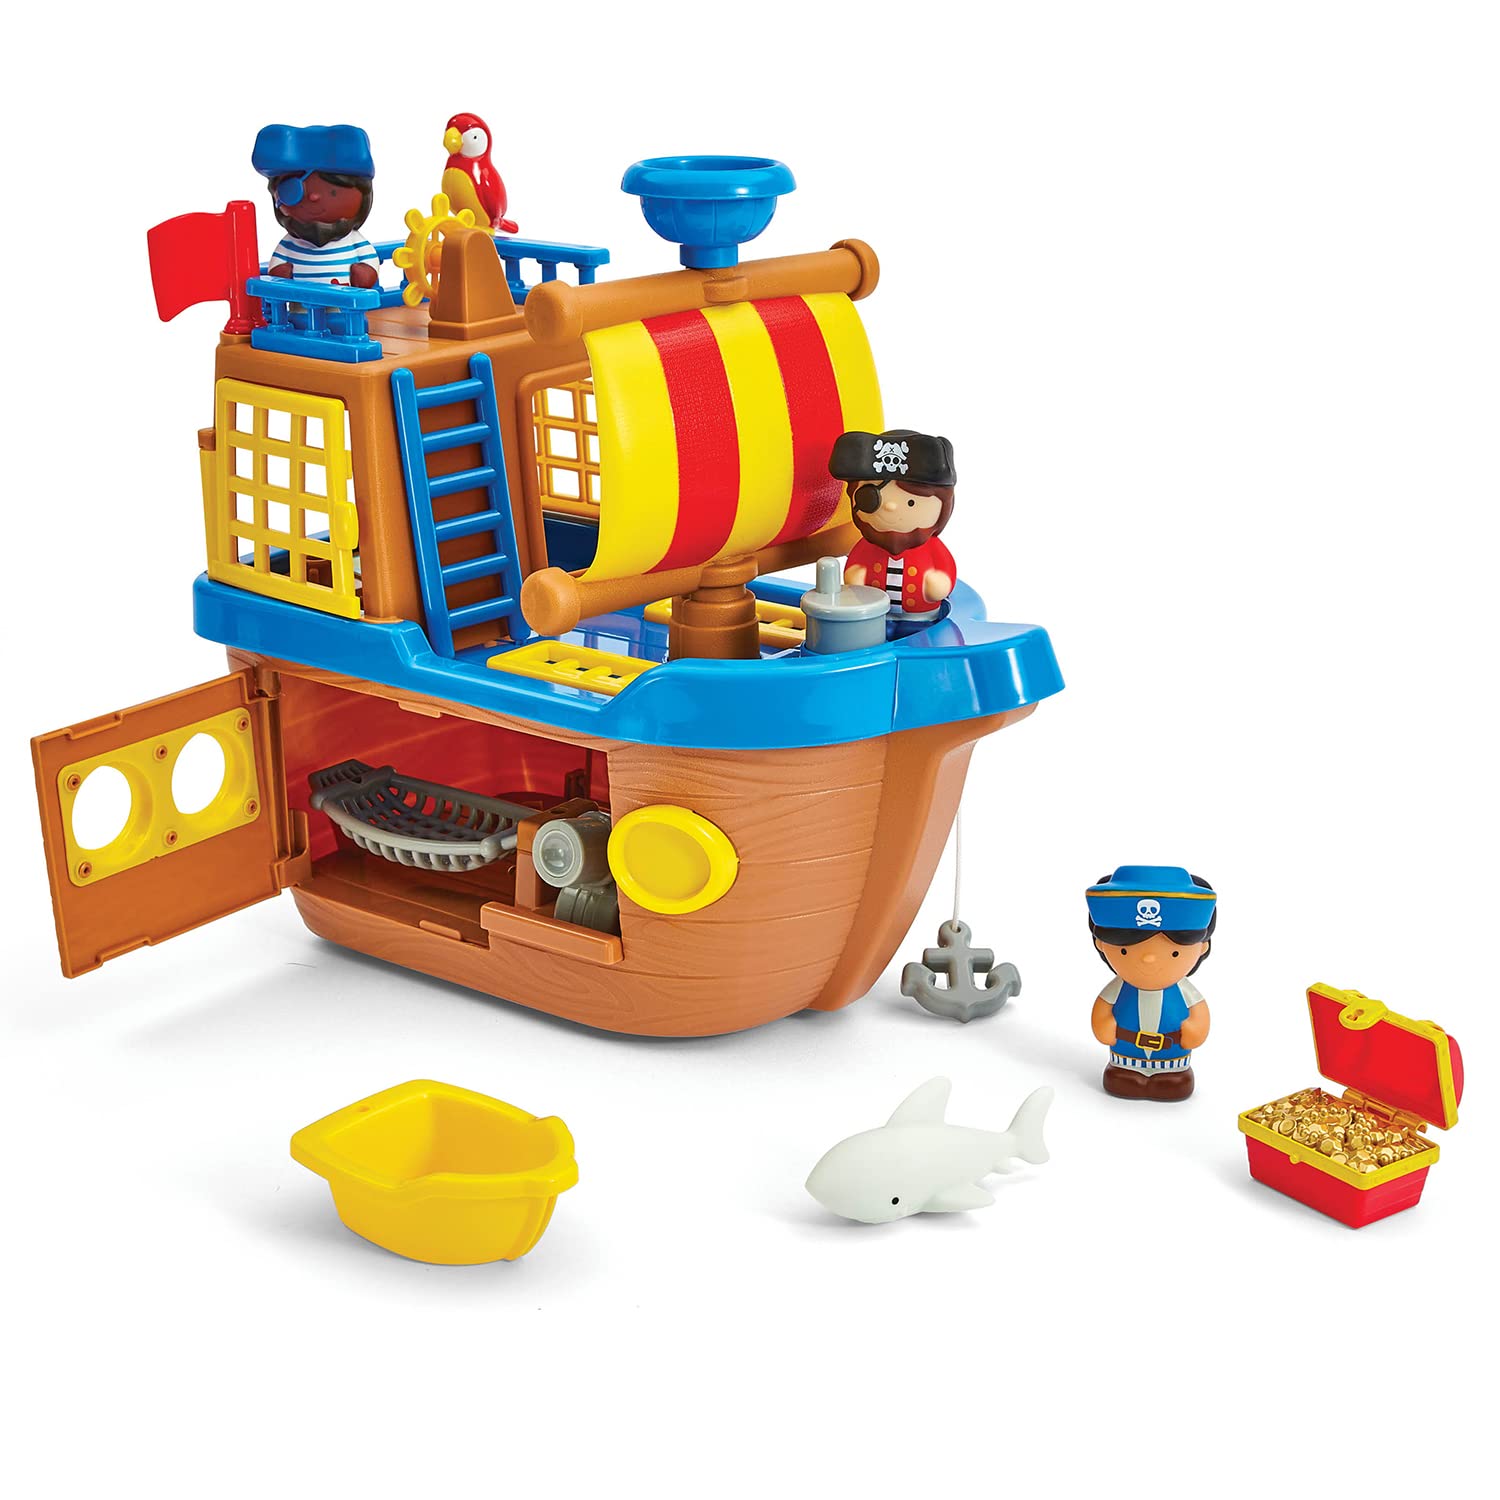 Kidoozie Rockin' Pirate Ship Playset with Light & Sounds - Interactive Push-Along Pirate Ship Toy with 3 Figures - The Perfect Playset for Your Preschooler!